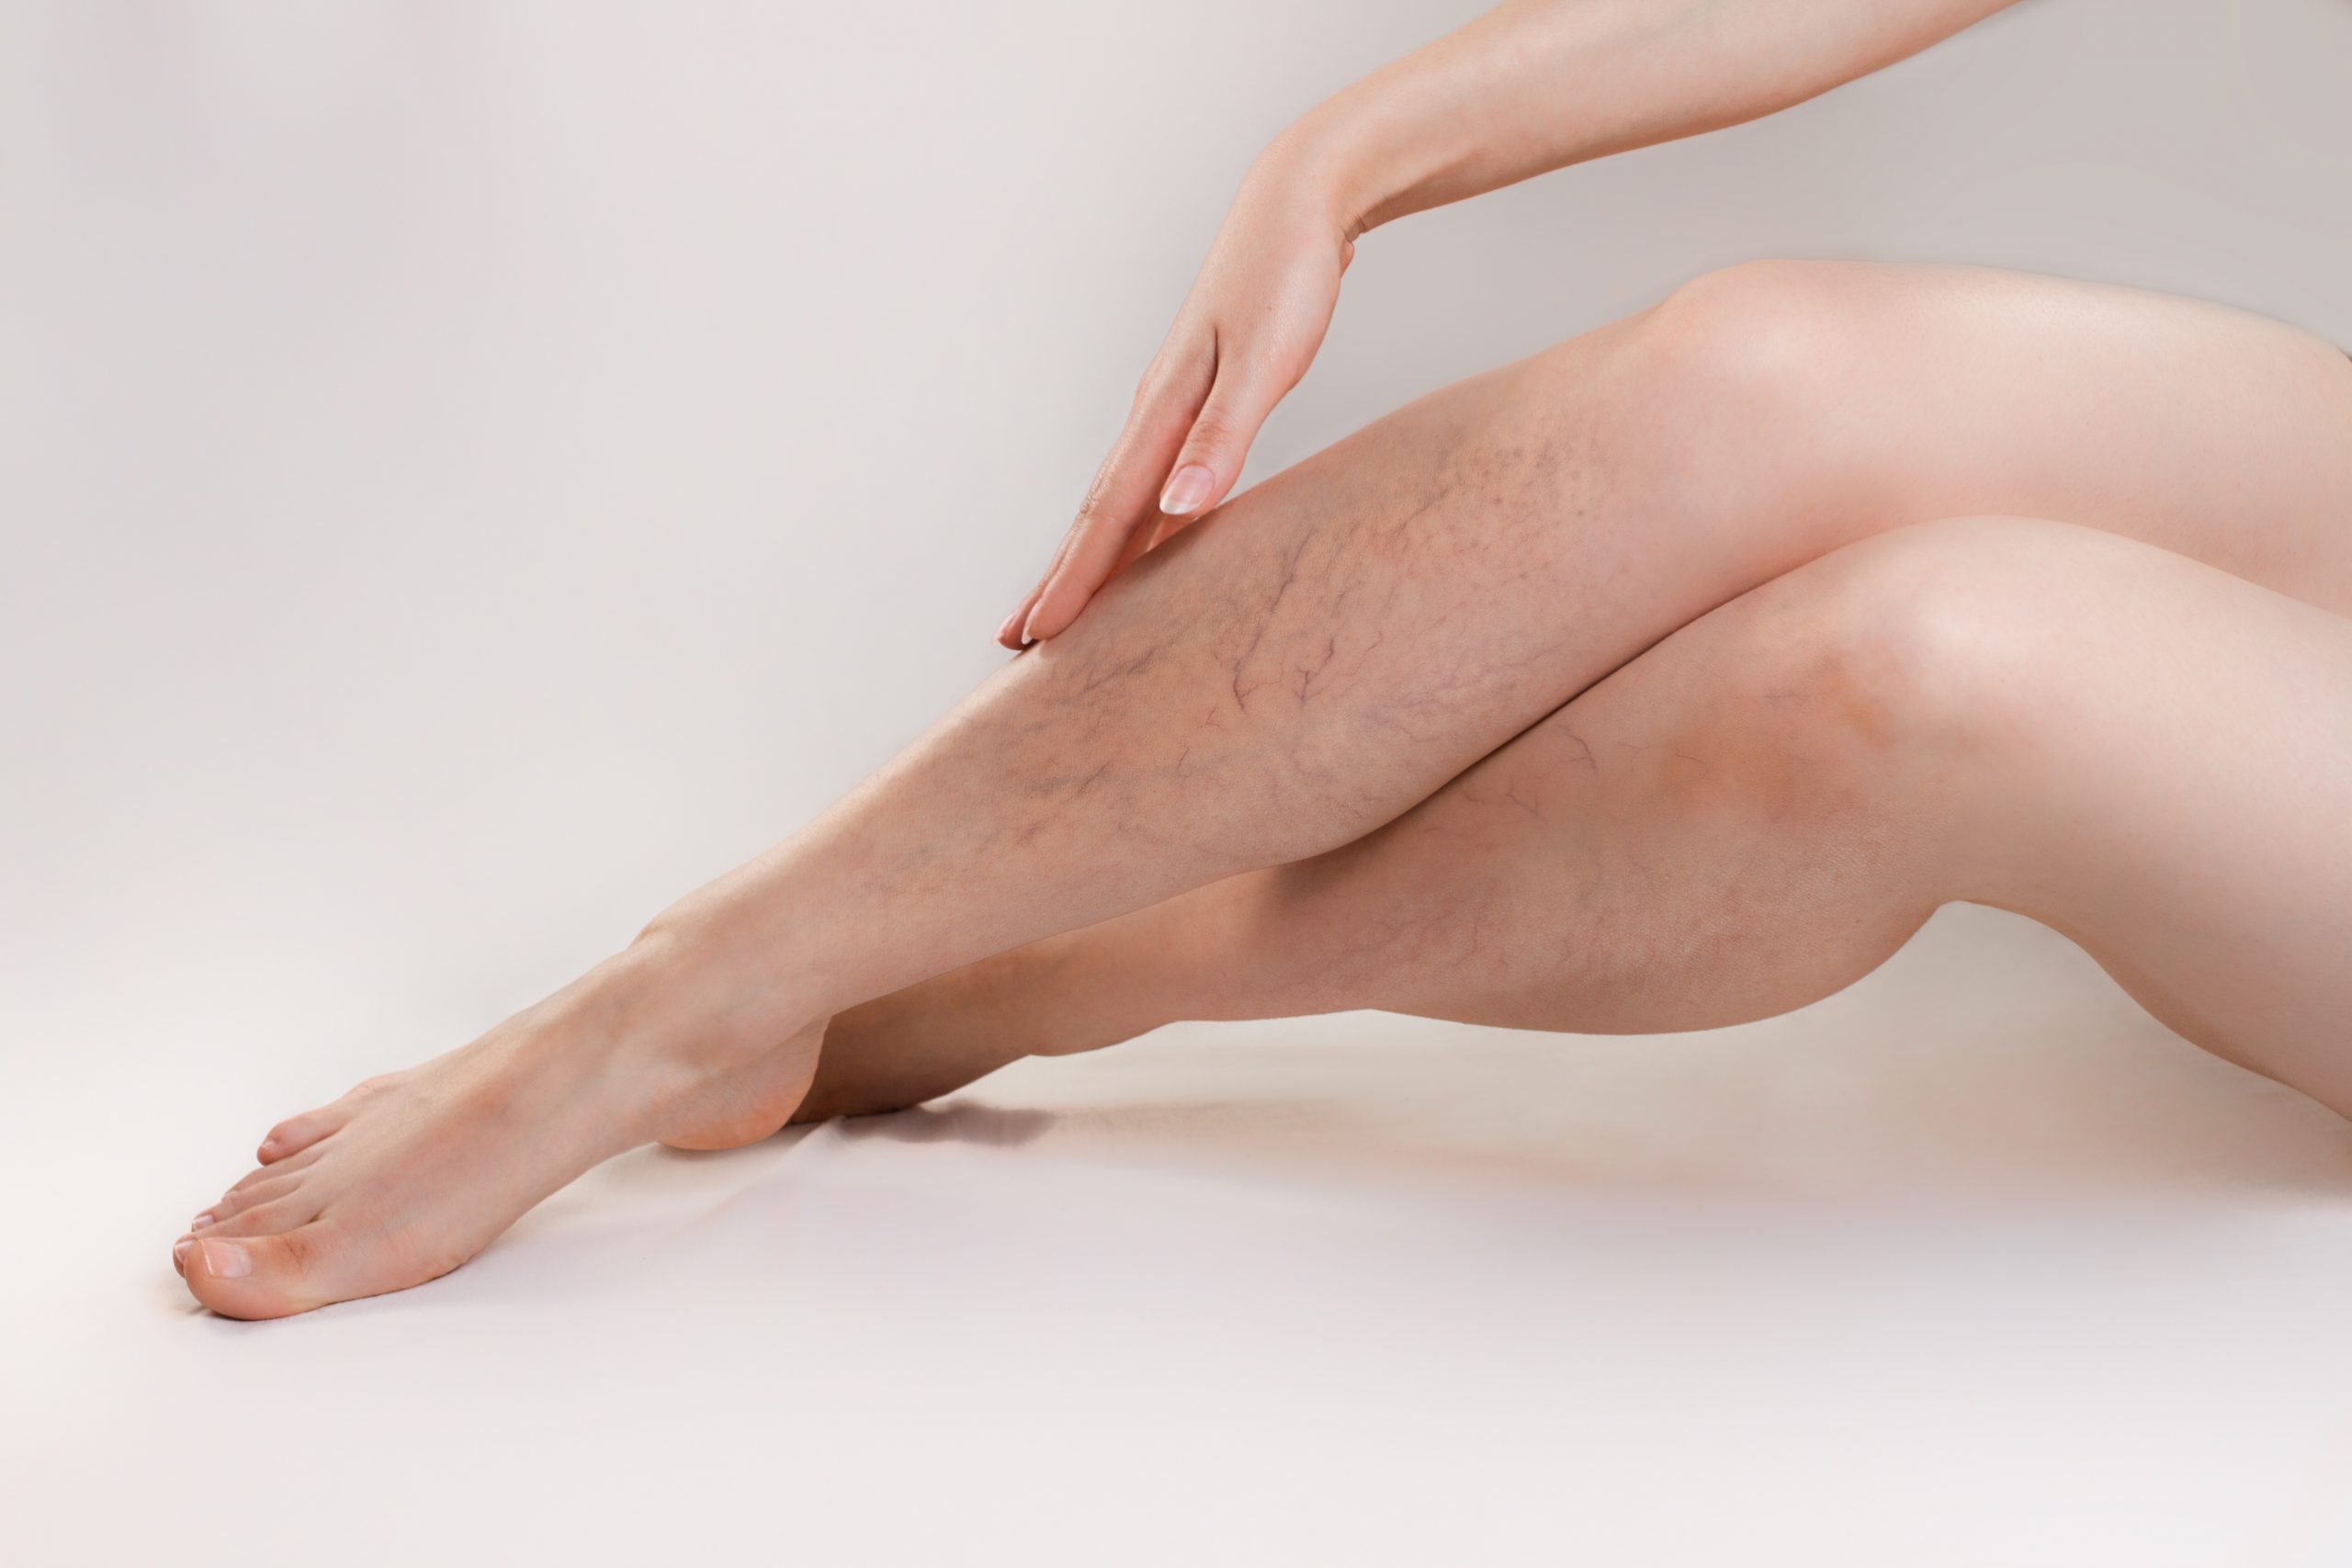 4 Common Treatments for Spider Veins You Need to Understand